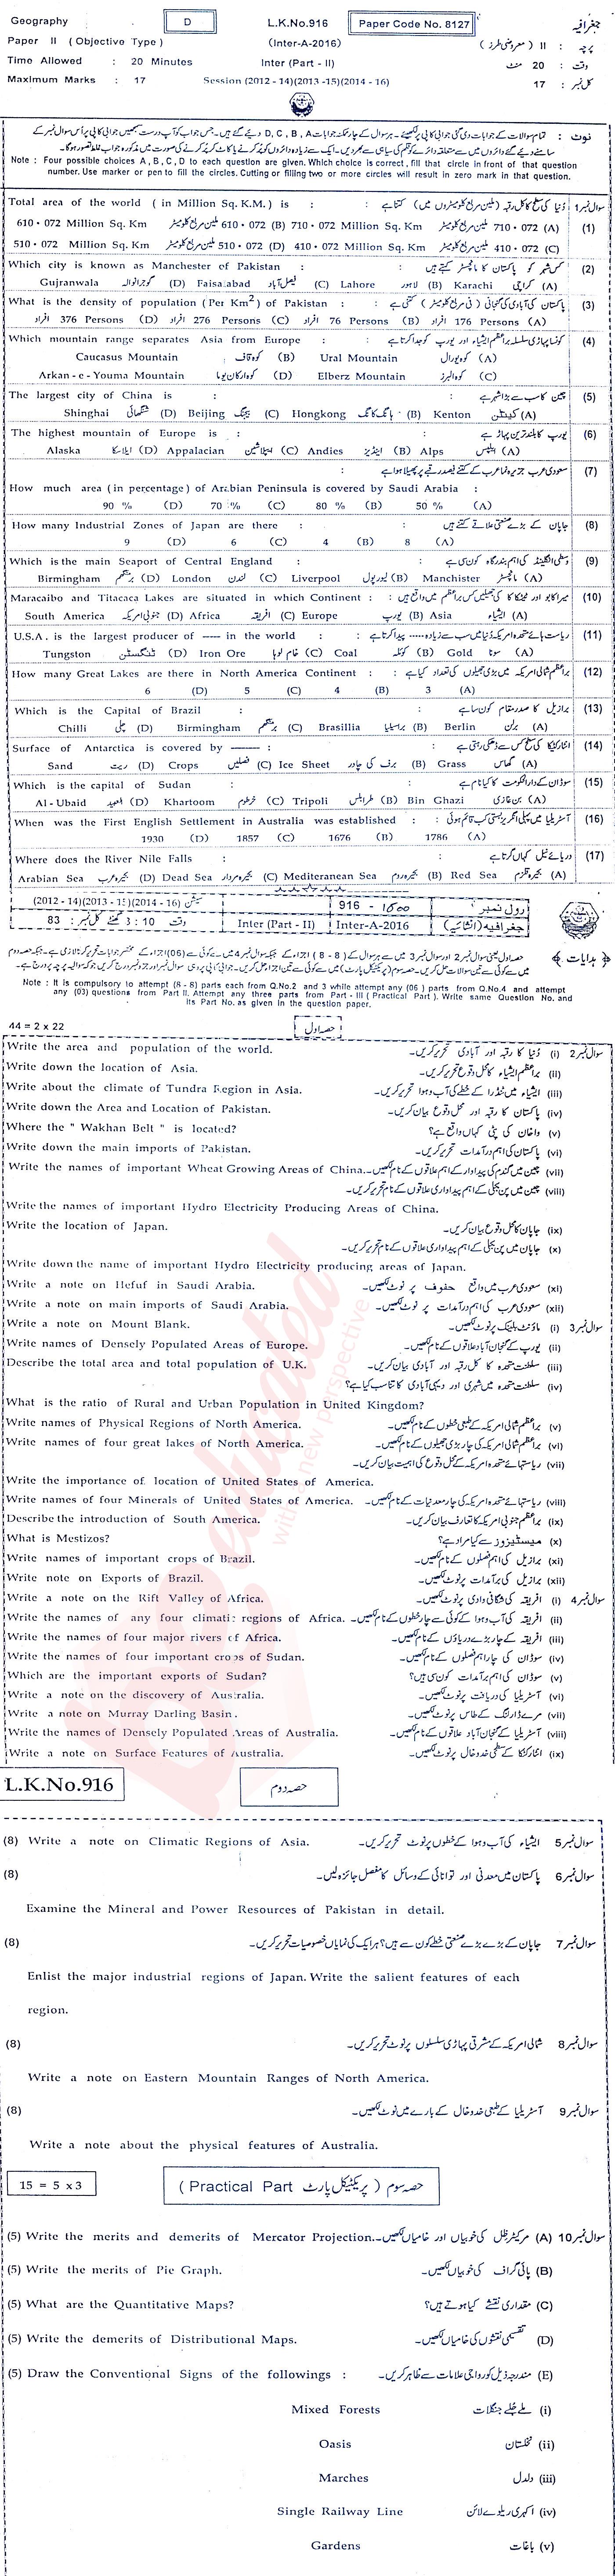 Commercial Geography FA Part 2 Past Paper Group 1 BISE Bahawalpur 2016